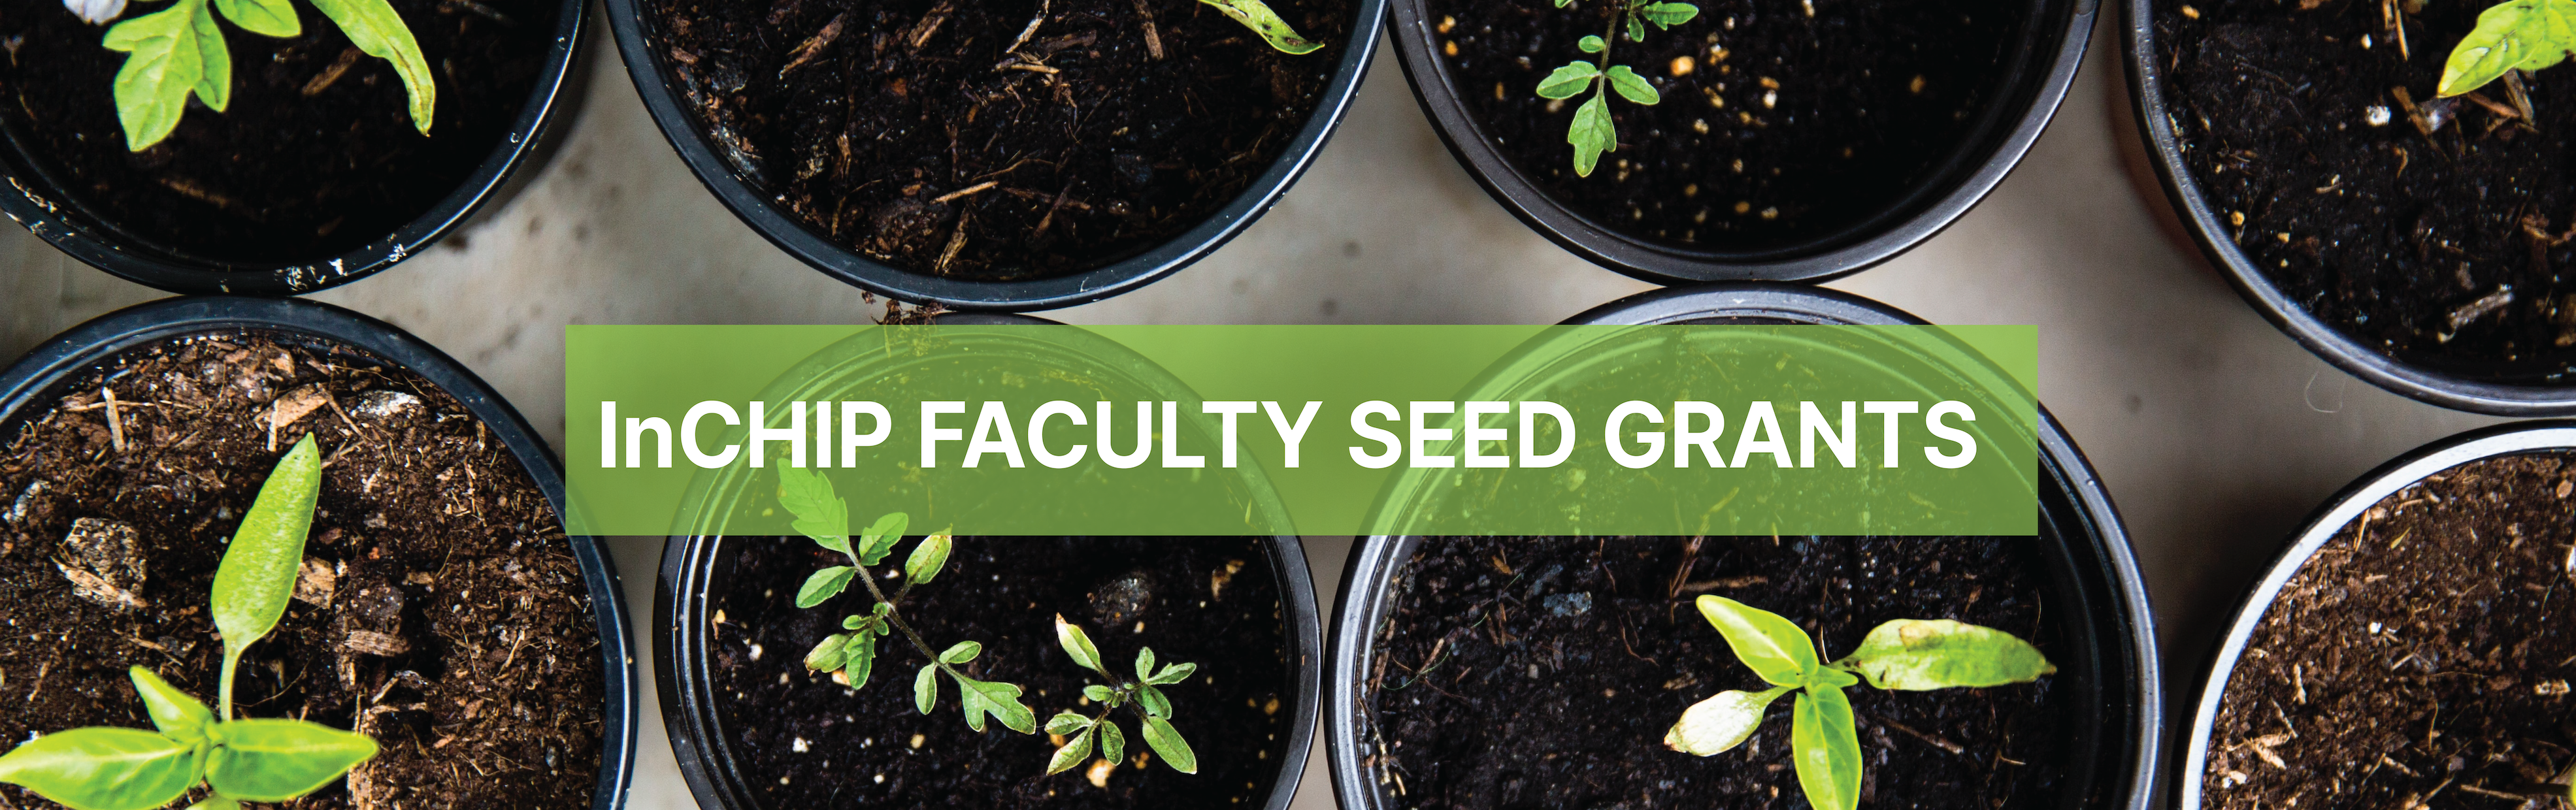 InCHIP Faculty Seed Grants